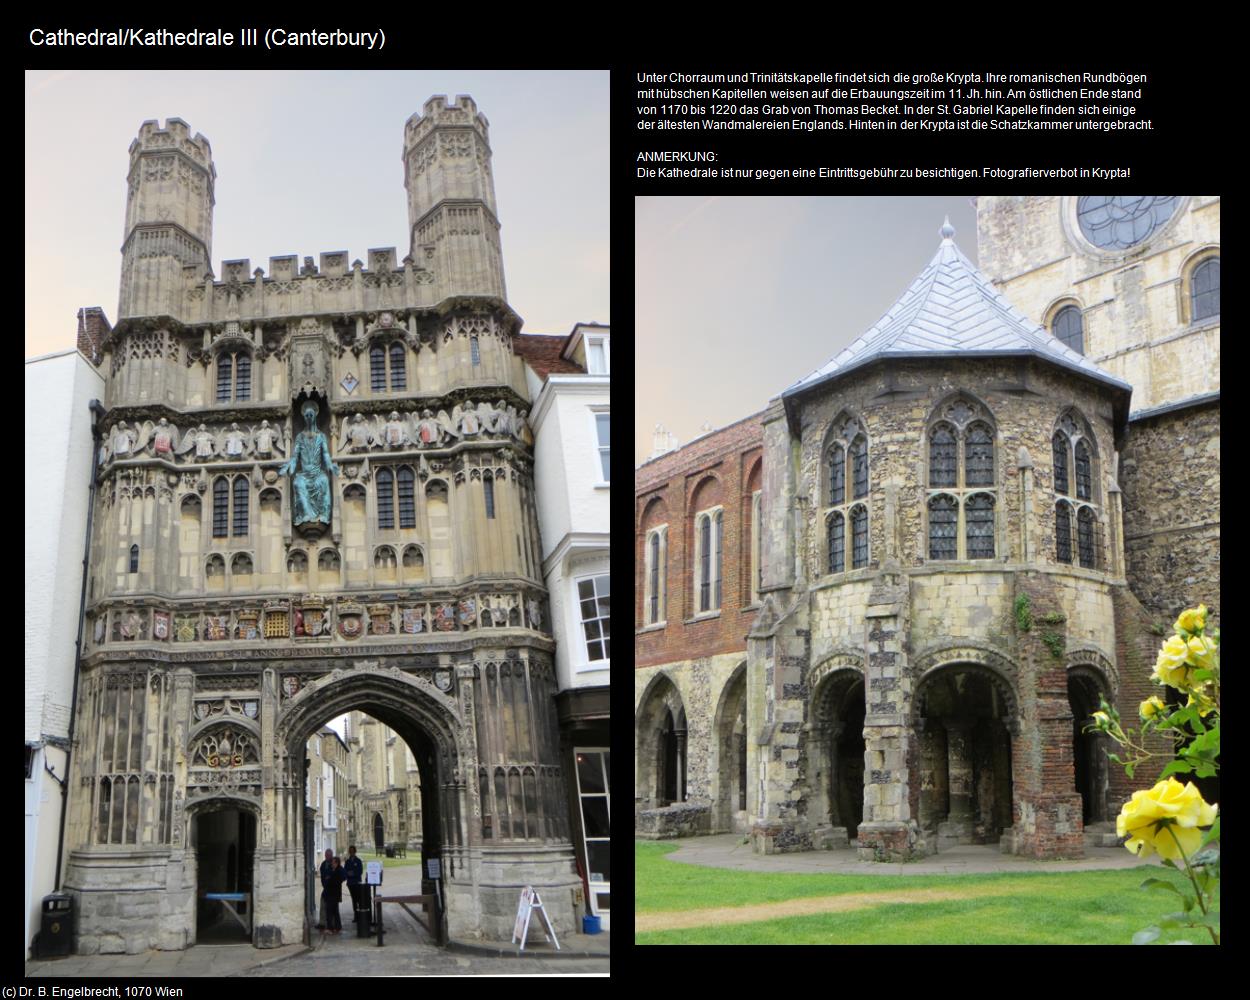 Cathedral/Kathedrale III (Canterbury, England) in Kulturatlas-ENGLAND und WALES